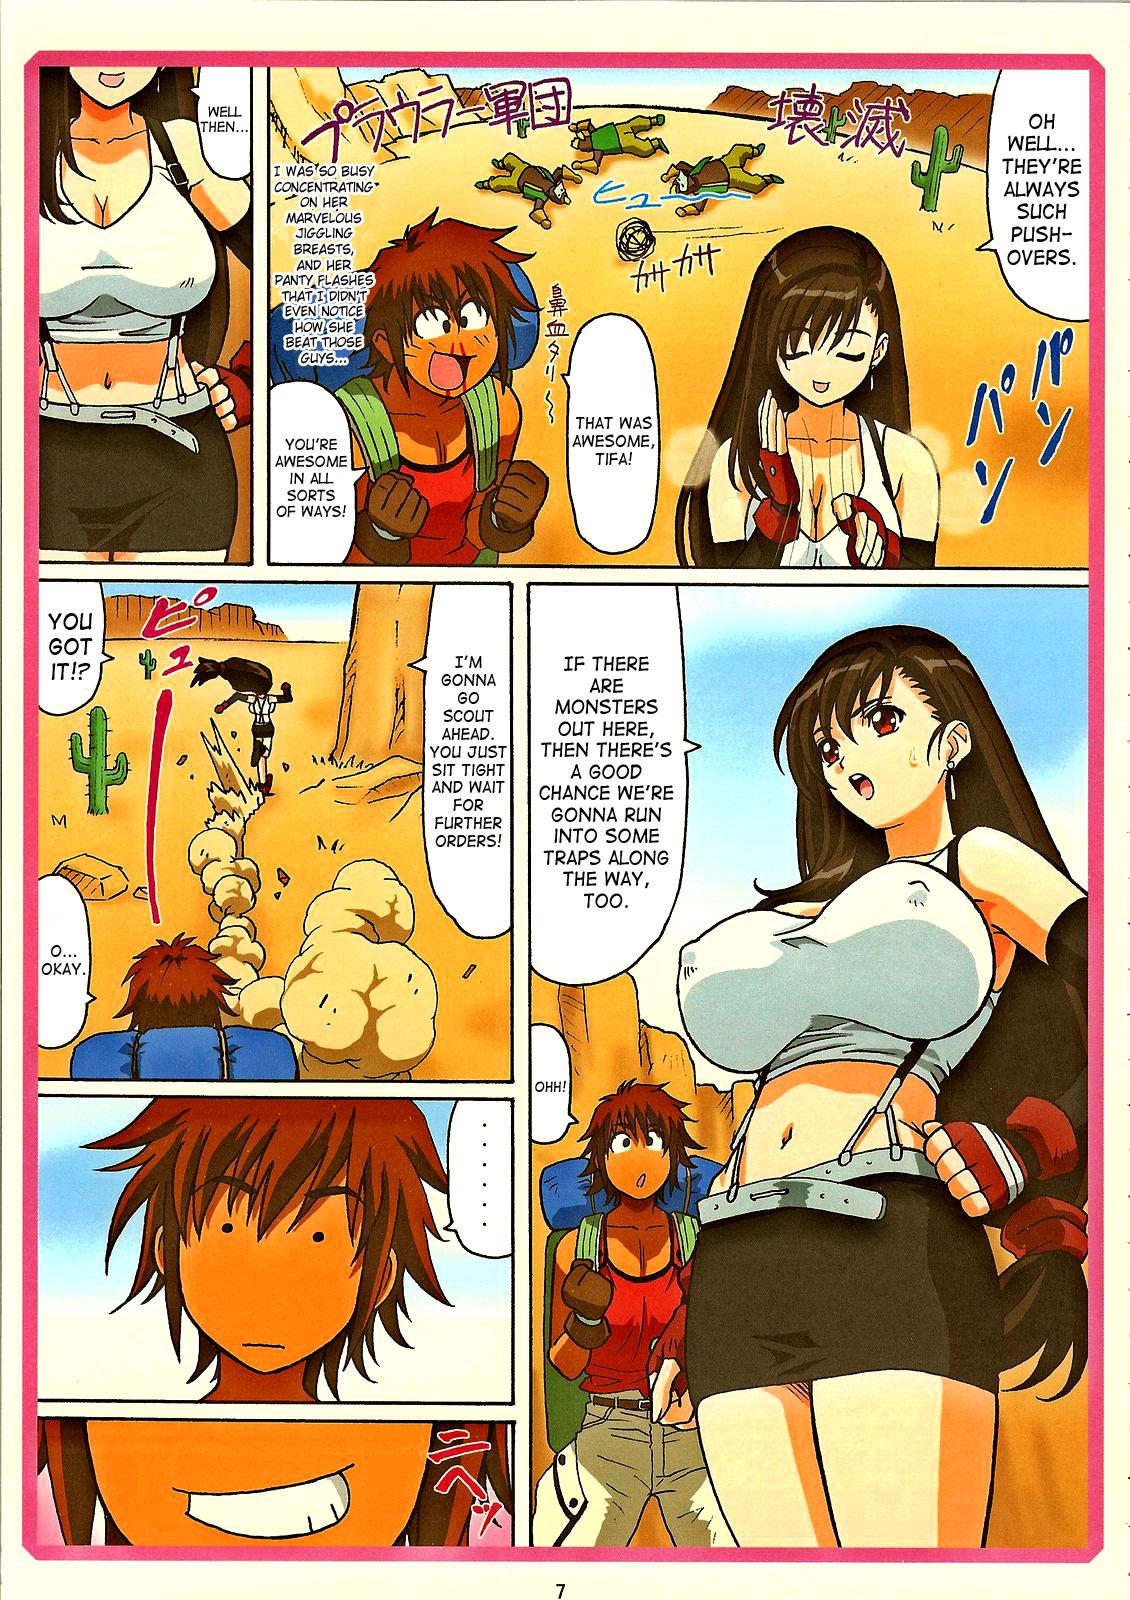 Hot Girl Fuck Tifa W cup - Final fantasy vii Phat Ass - Page 6